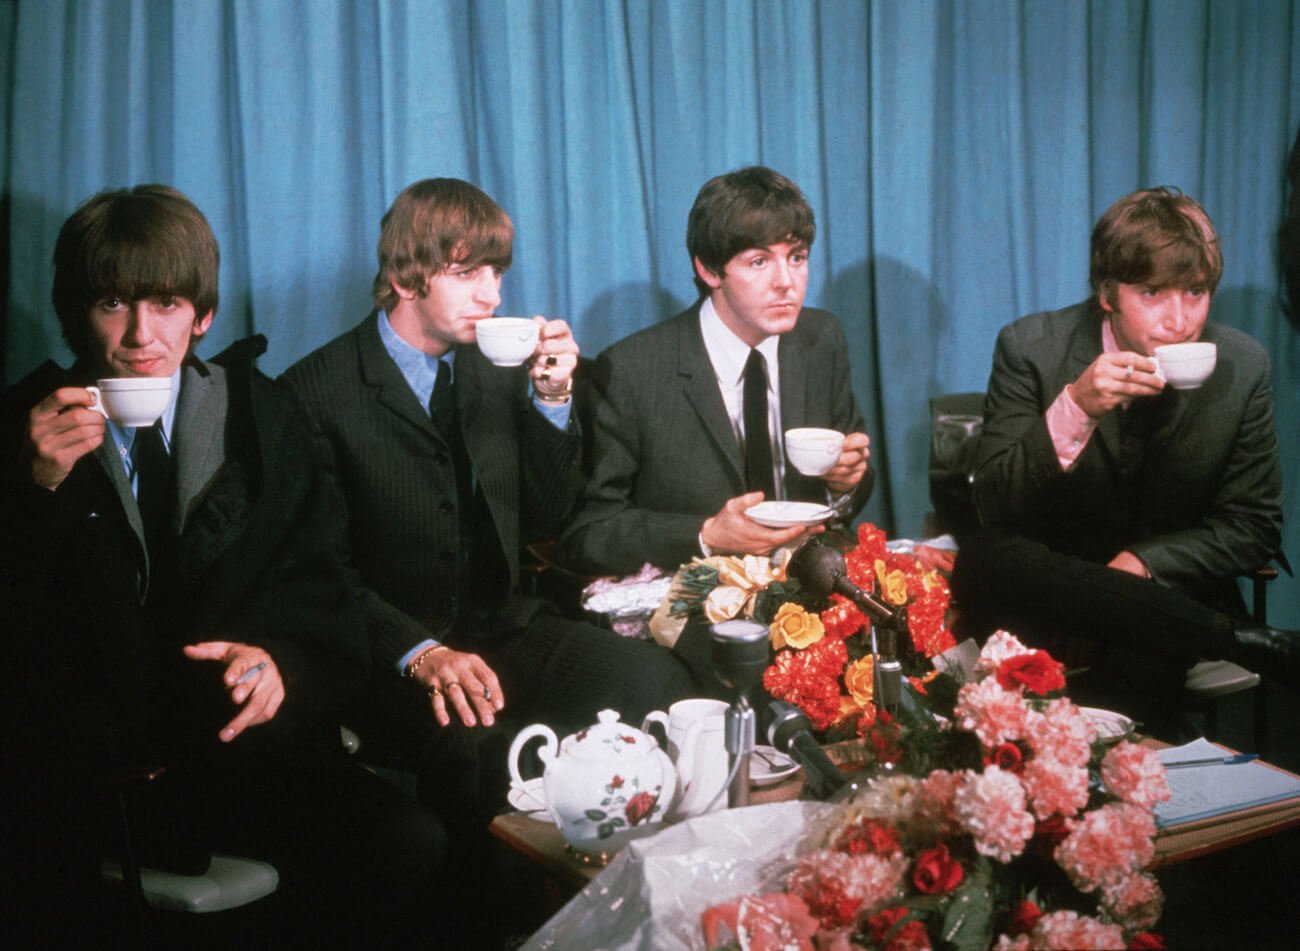 Paul McCartney and The Beatles drinking tea in 1963.